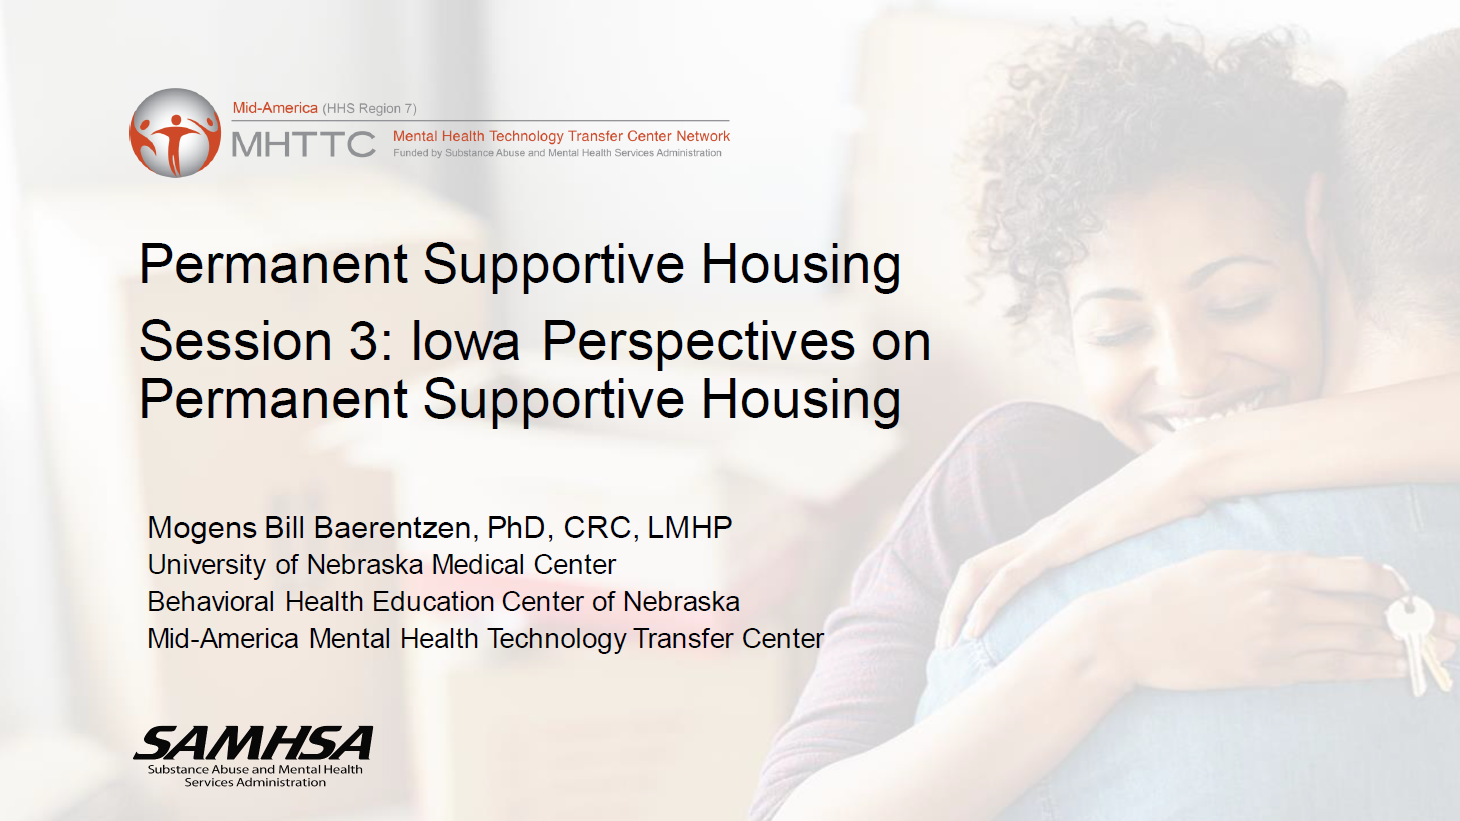 Permanent Supportive Housing April 2021 Title Slide